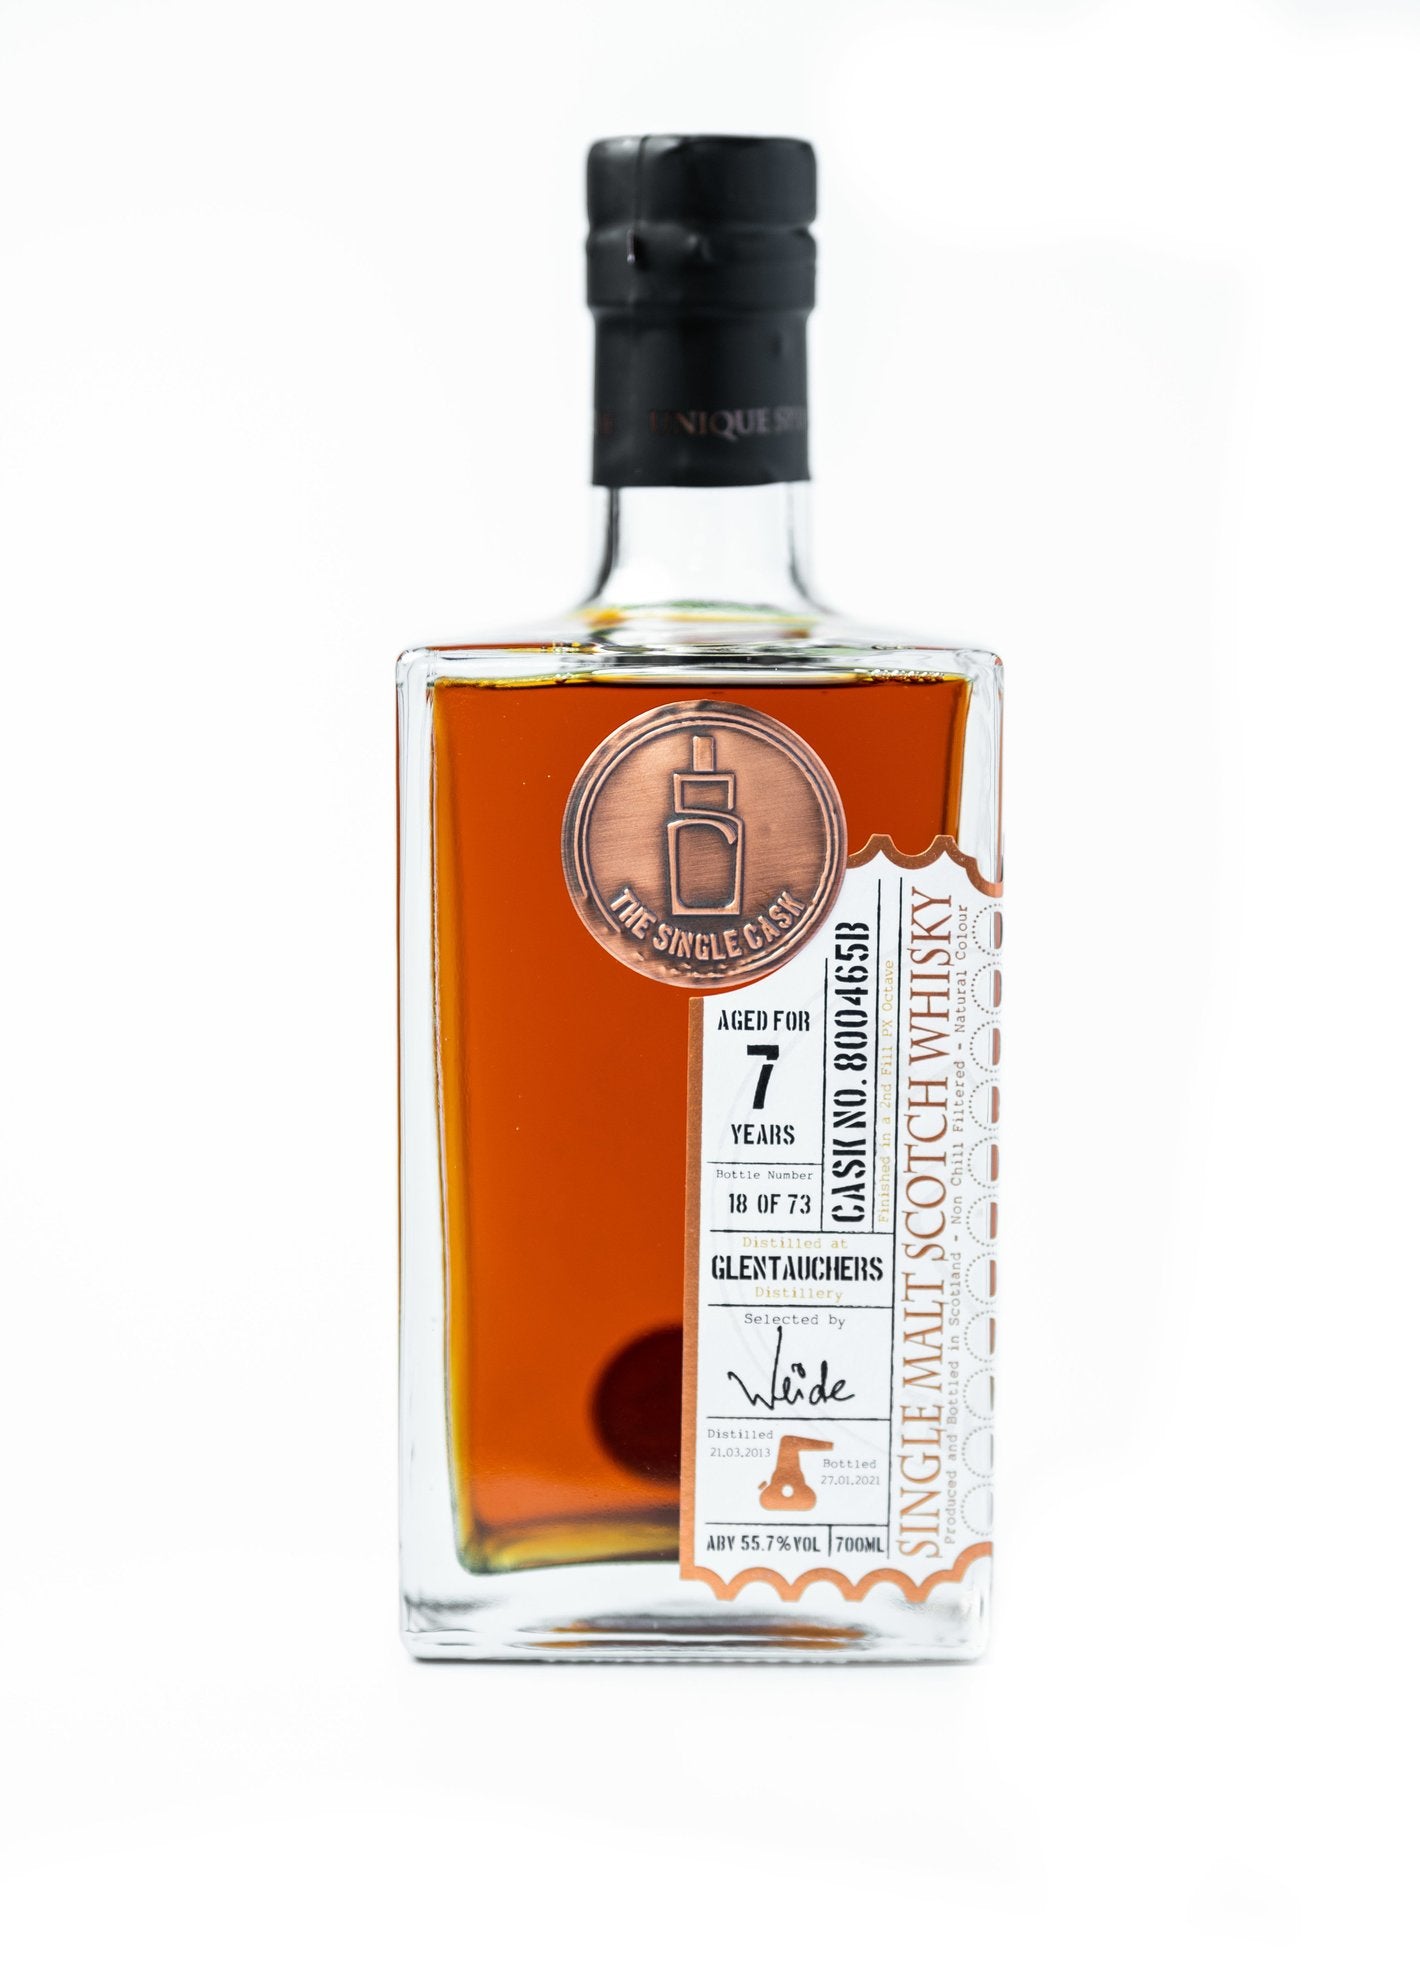 Glentauchers 7 years old scotch whisky by The Single Cask independent bottler